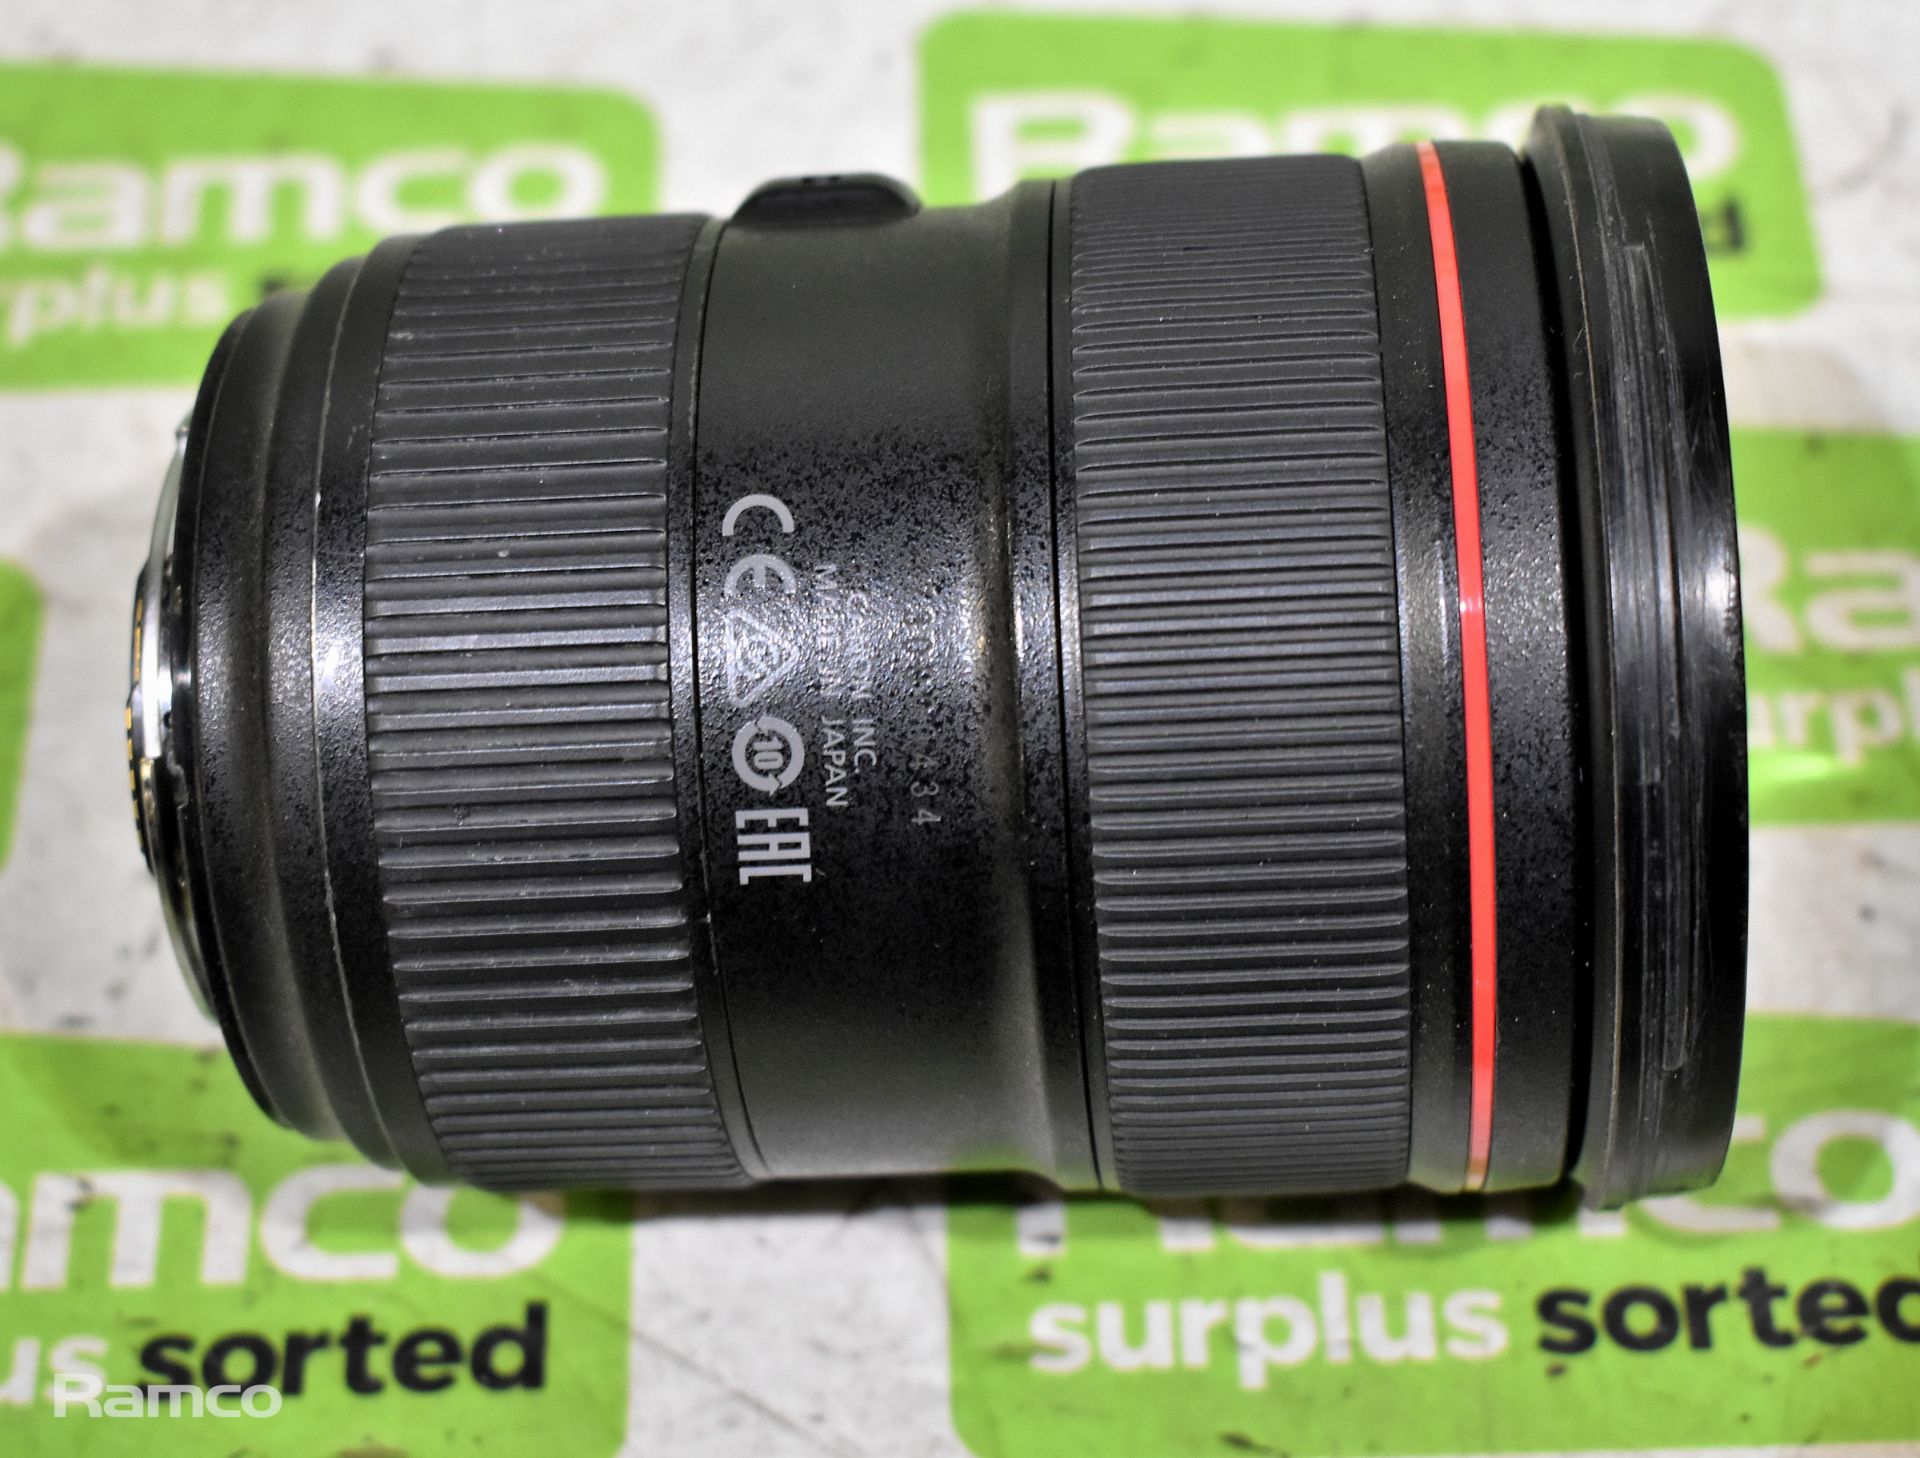 Canon Zoom lens EF 24-70mm F/2.8 L ii USM lens with Canon EW-88C hood - Image 4 of 7